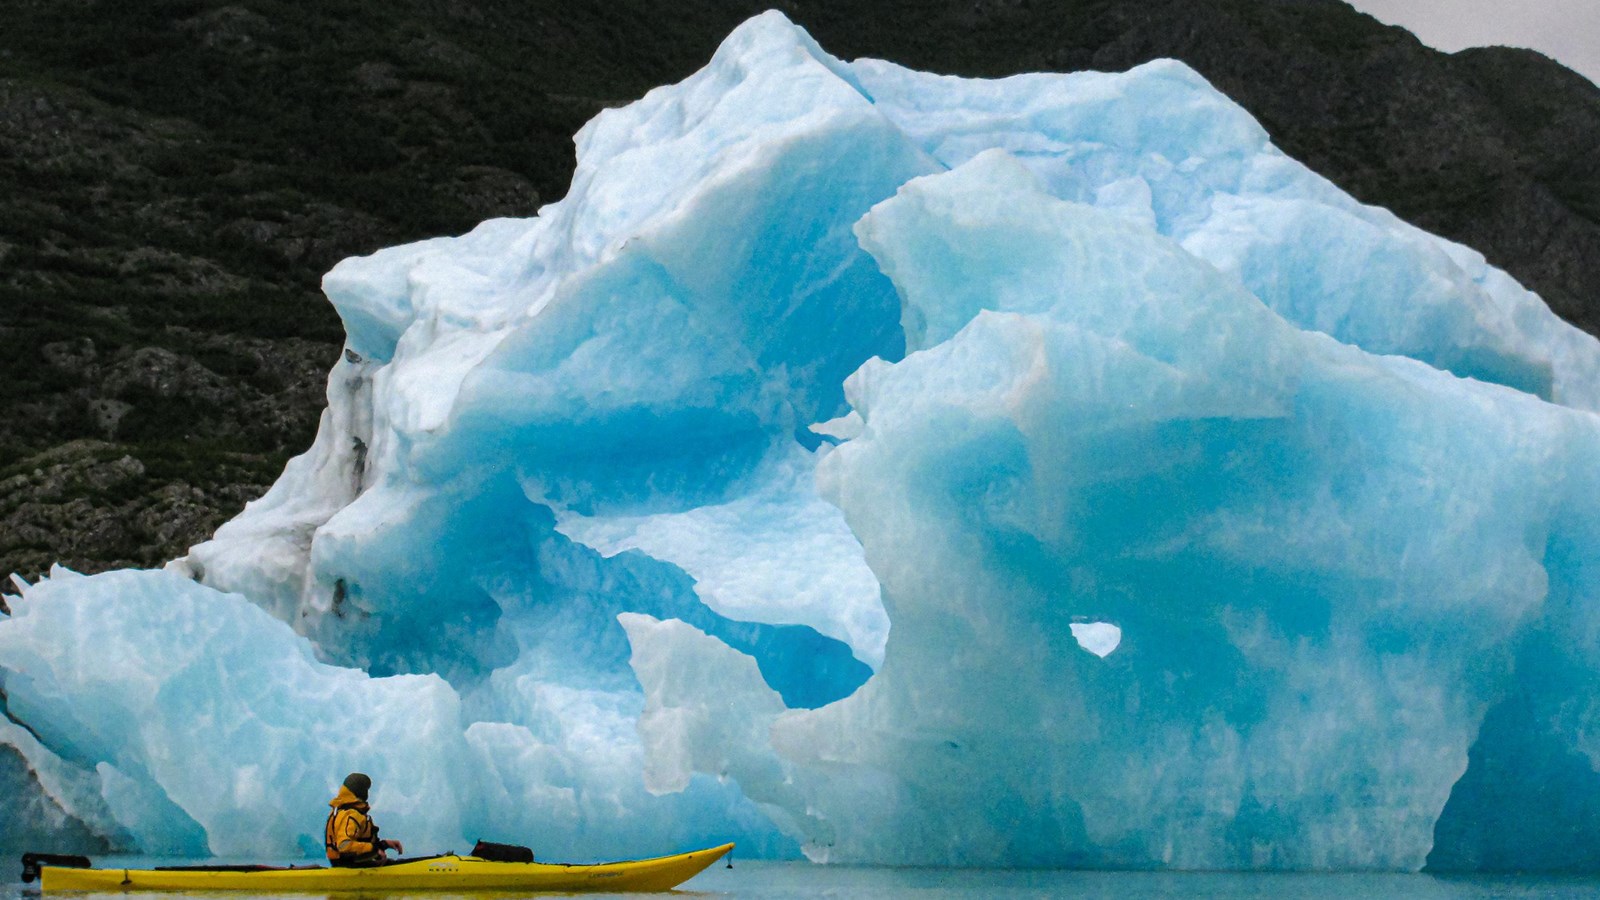 Why is the Ice Blue? In Glacier Bay (U.S. National Park Service)